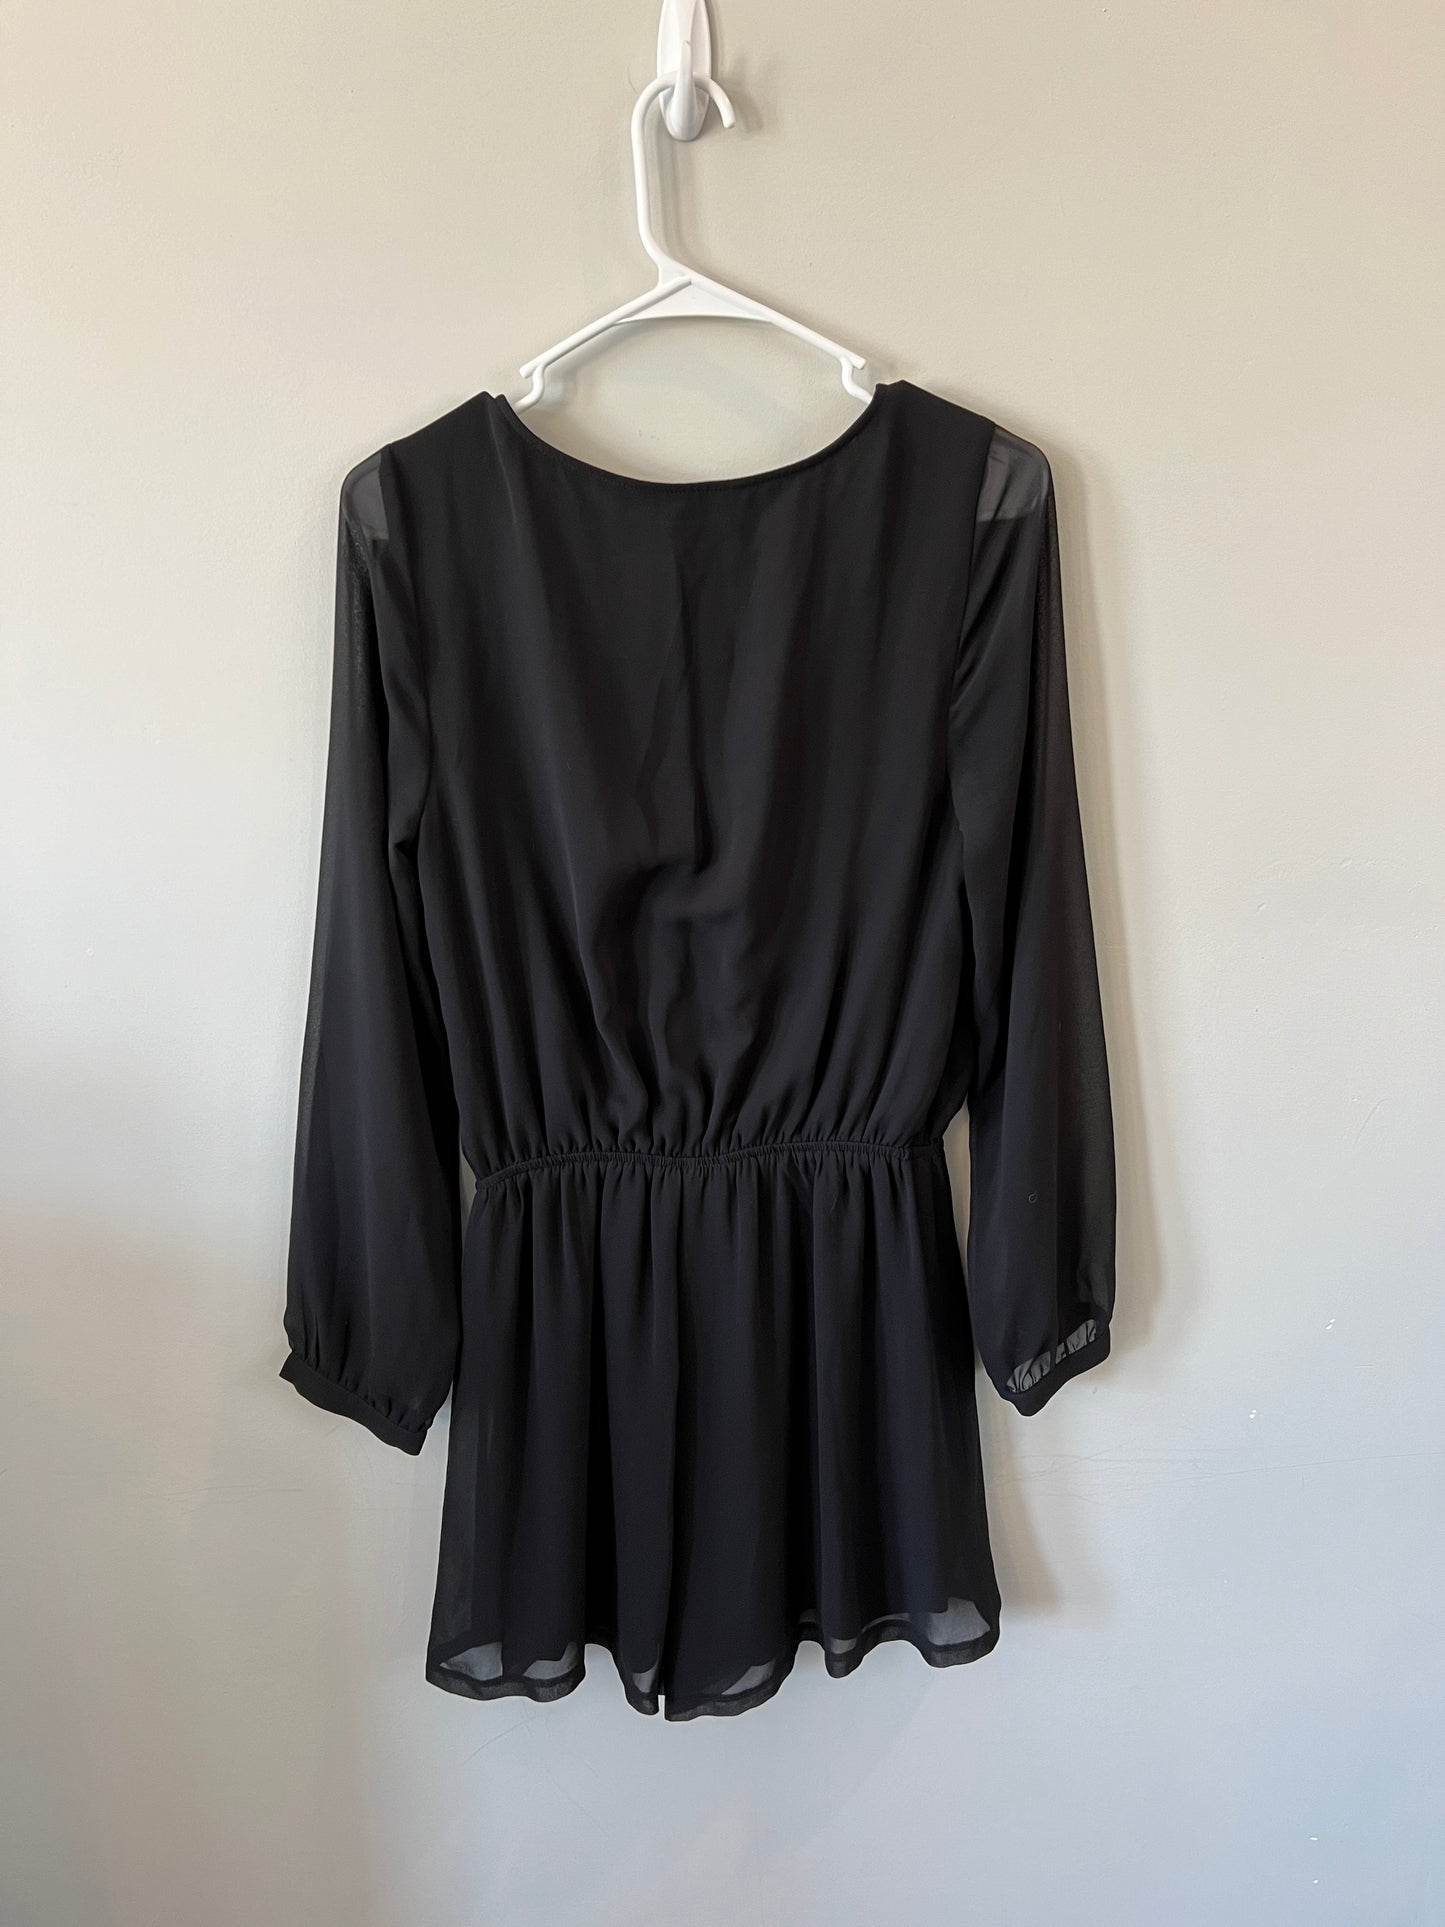 Women’s S Black Express Romper with Sheer Detailing- PPU 45044 (Liberty Twp)